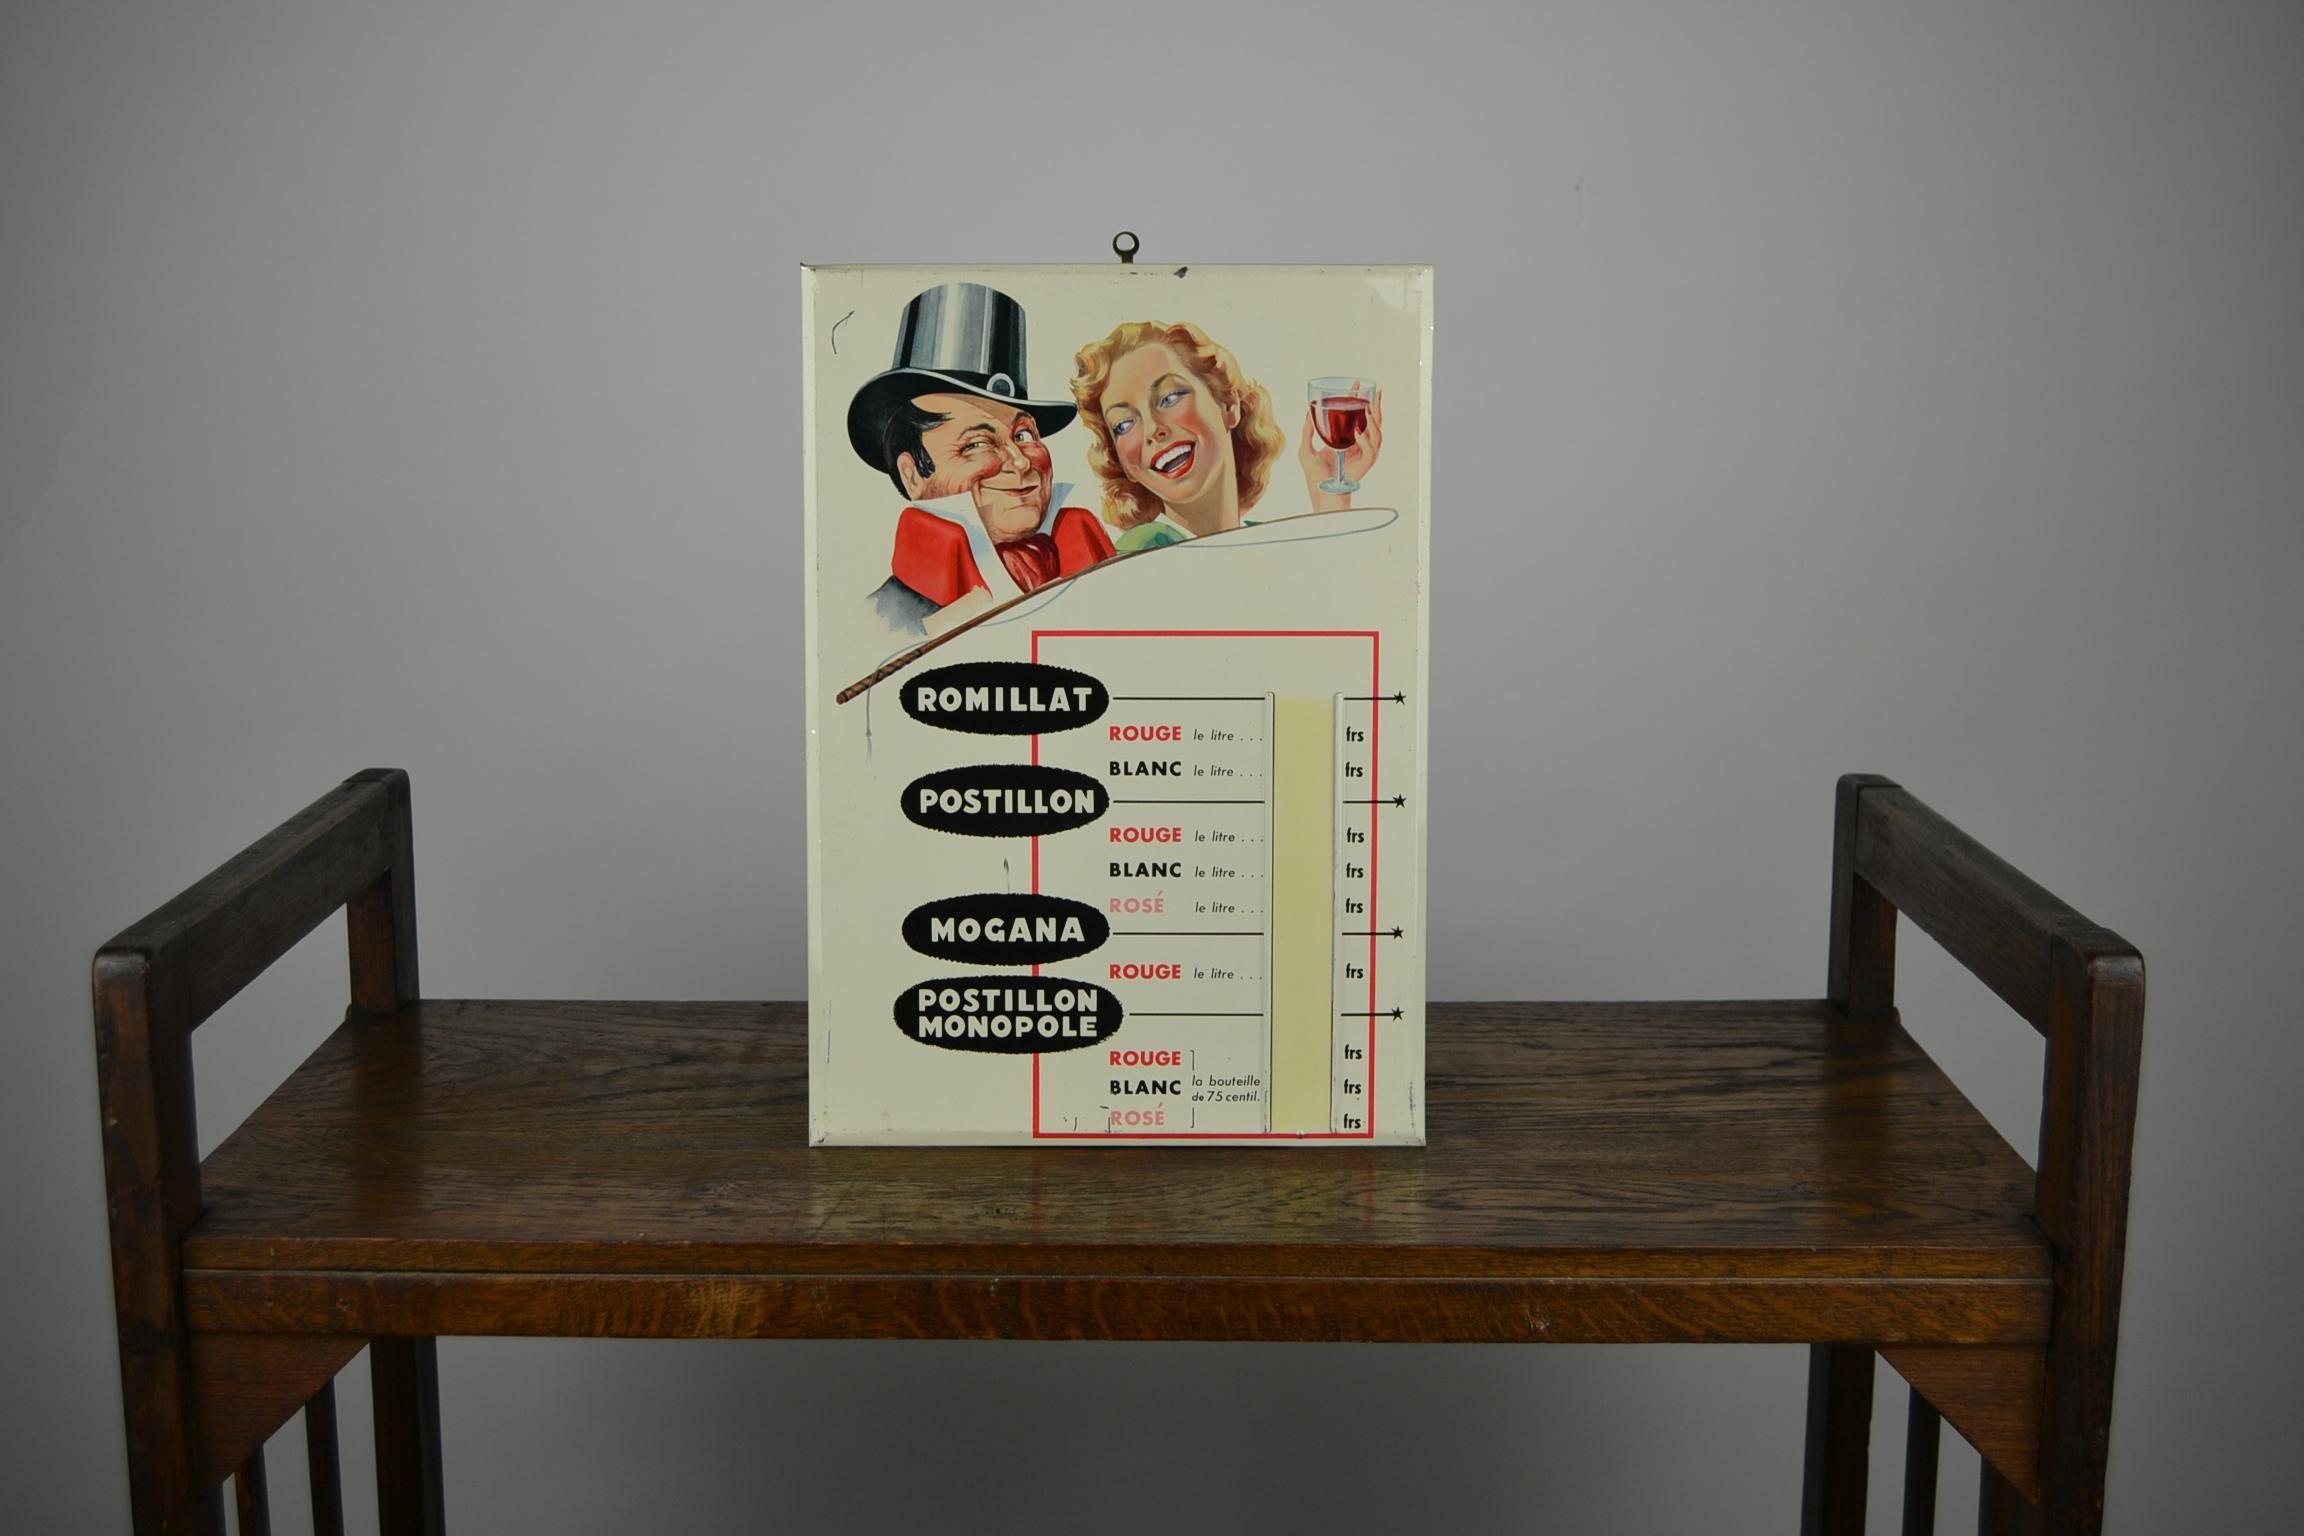 Original vintage lithographic tin sign - publicity sign - advertising sign - counter display - price display 
for Wine : Vin Du Postillon. 
Great design with a winking gentleman with top hat and a pretty lady holding up her glass of wine.
This